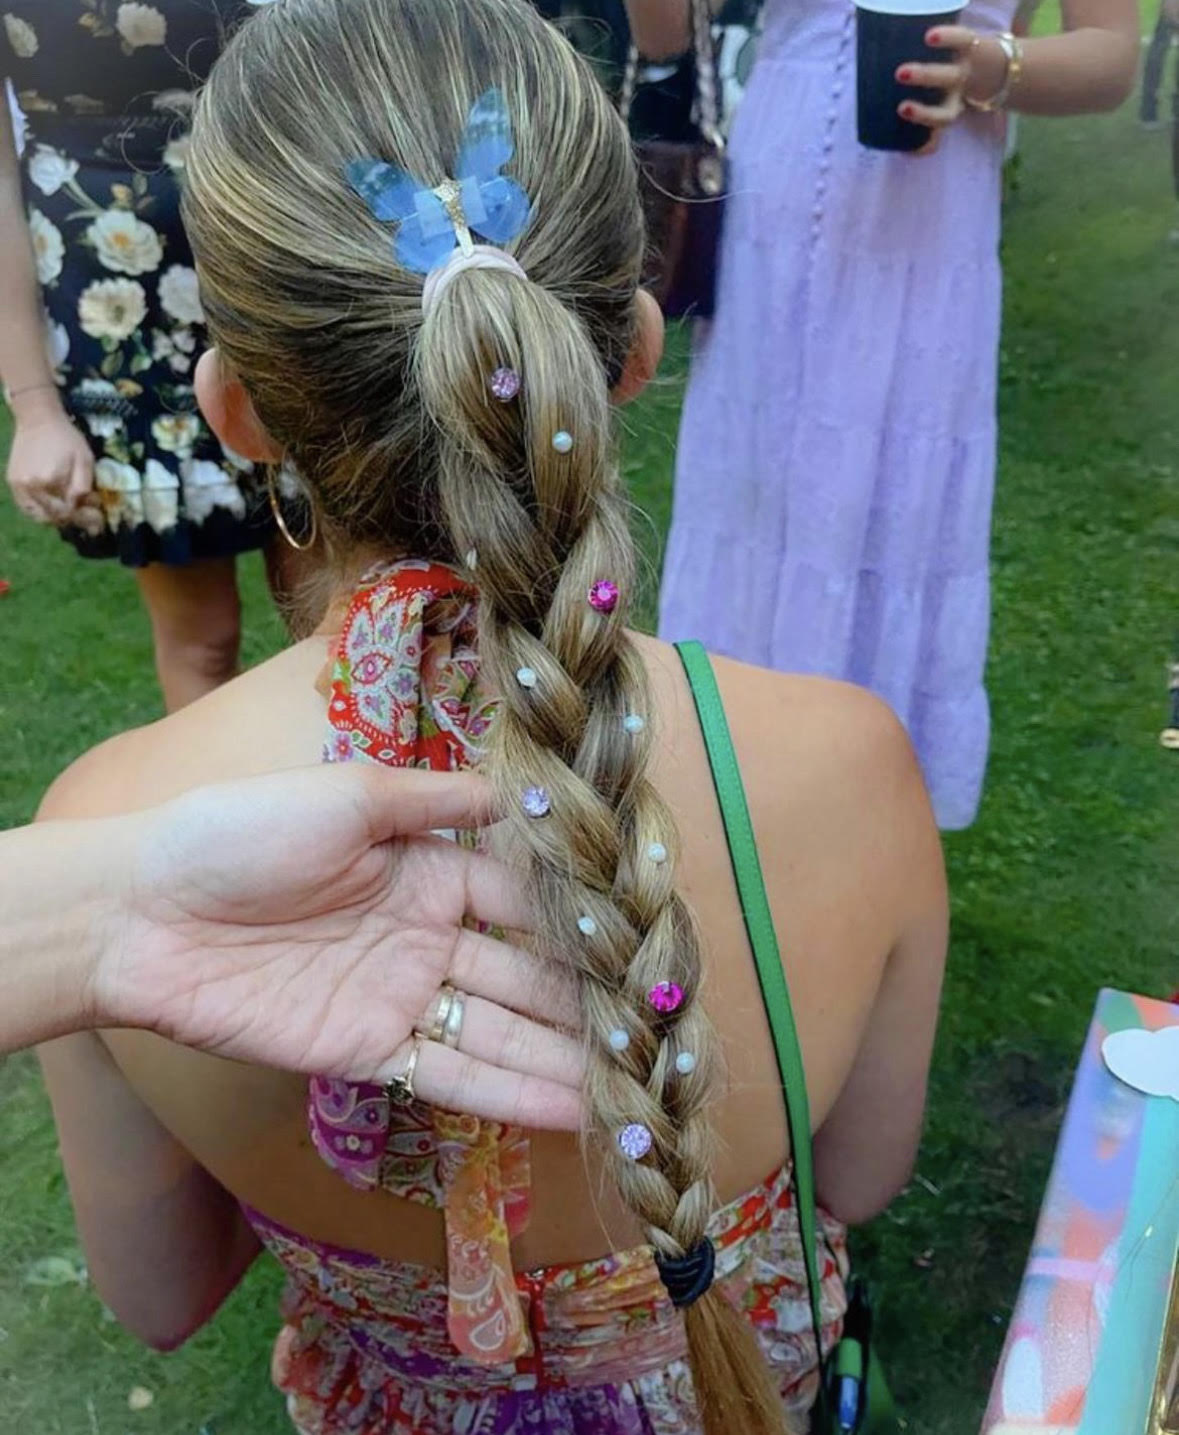 Captivating and Funky Festival Braids to Showcase Your Individuality | Rave  hairstyles, Festival braids, Side part hairstyles